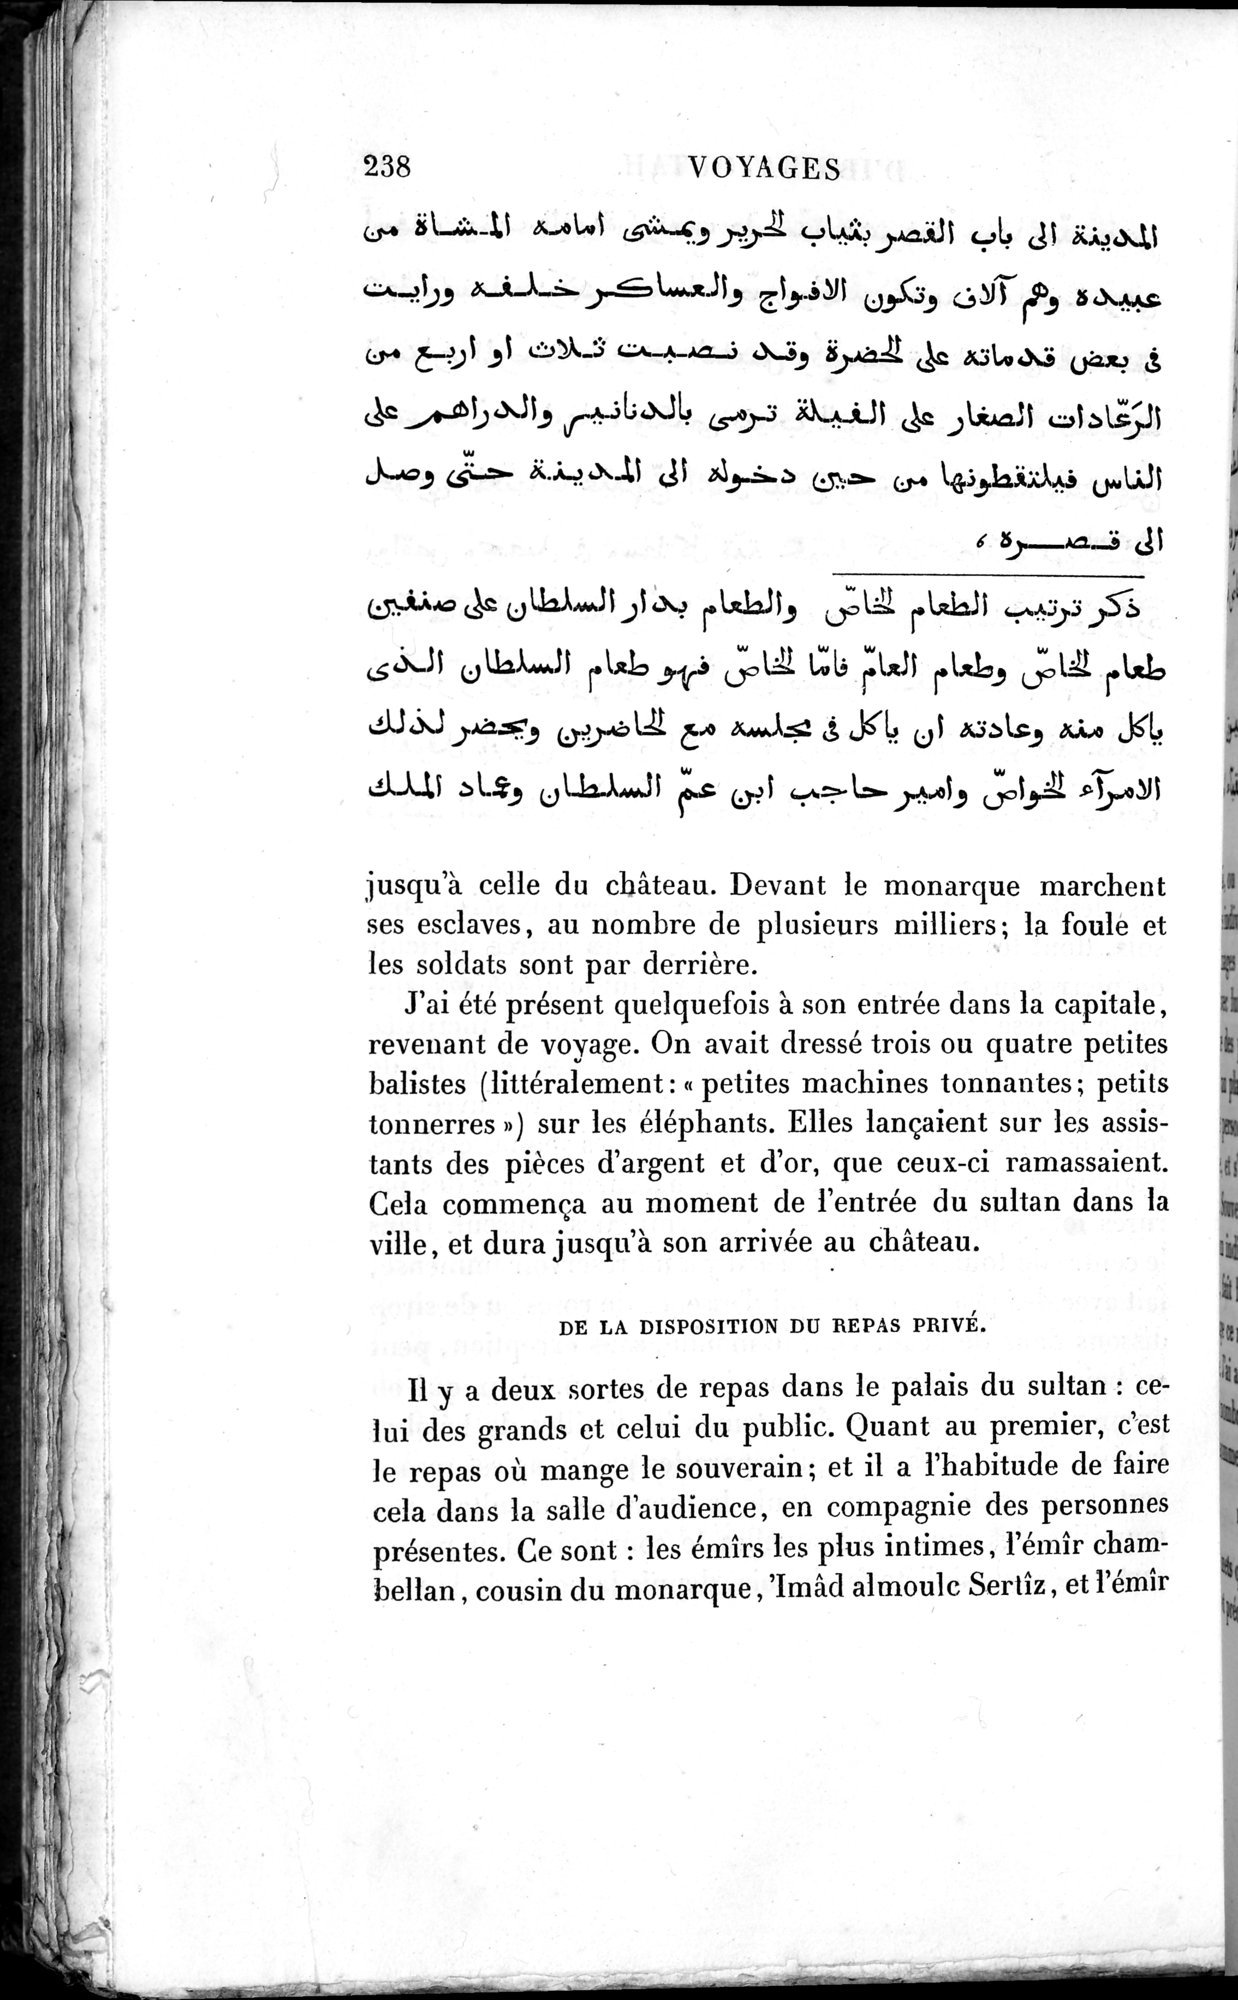 Voyages d'Ibn Batoutah : vol.3 / Page 278 (Grayscale High Resolution Image)